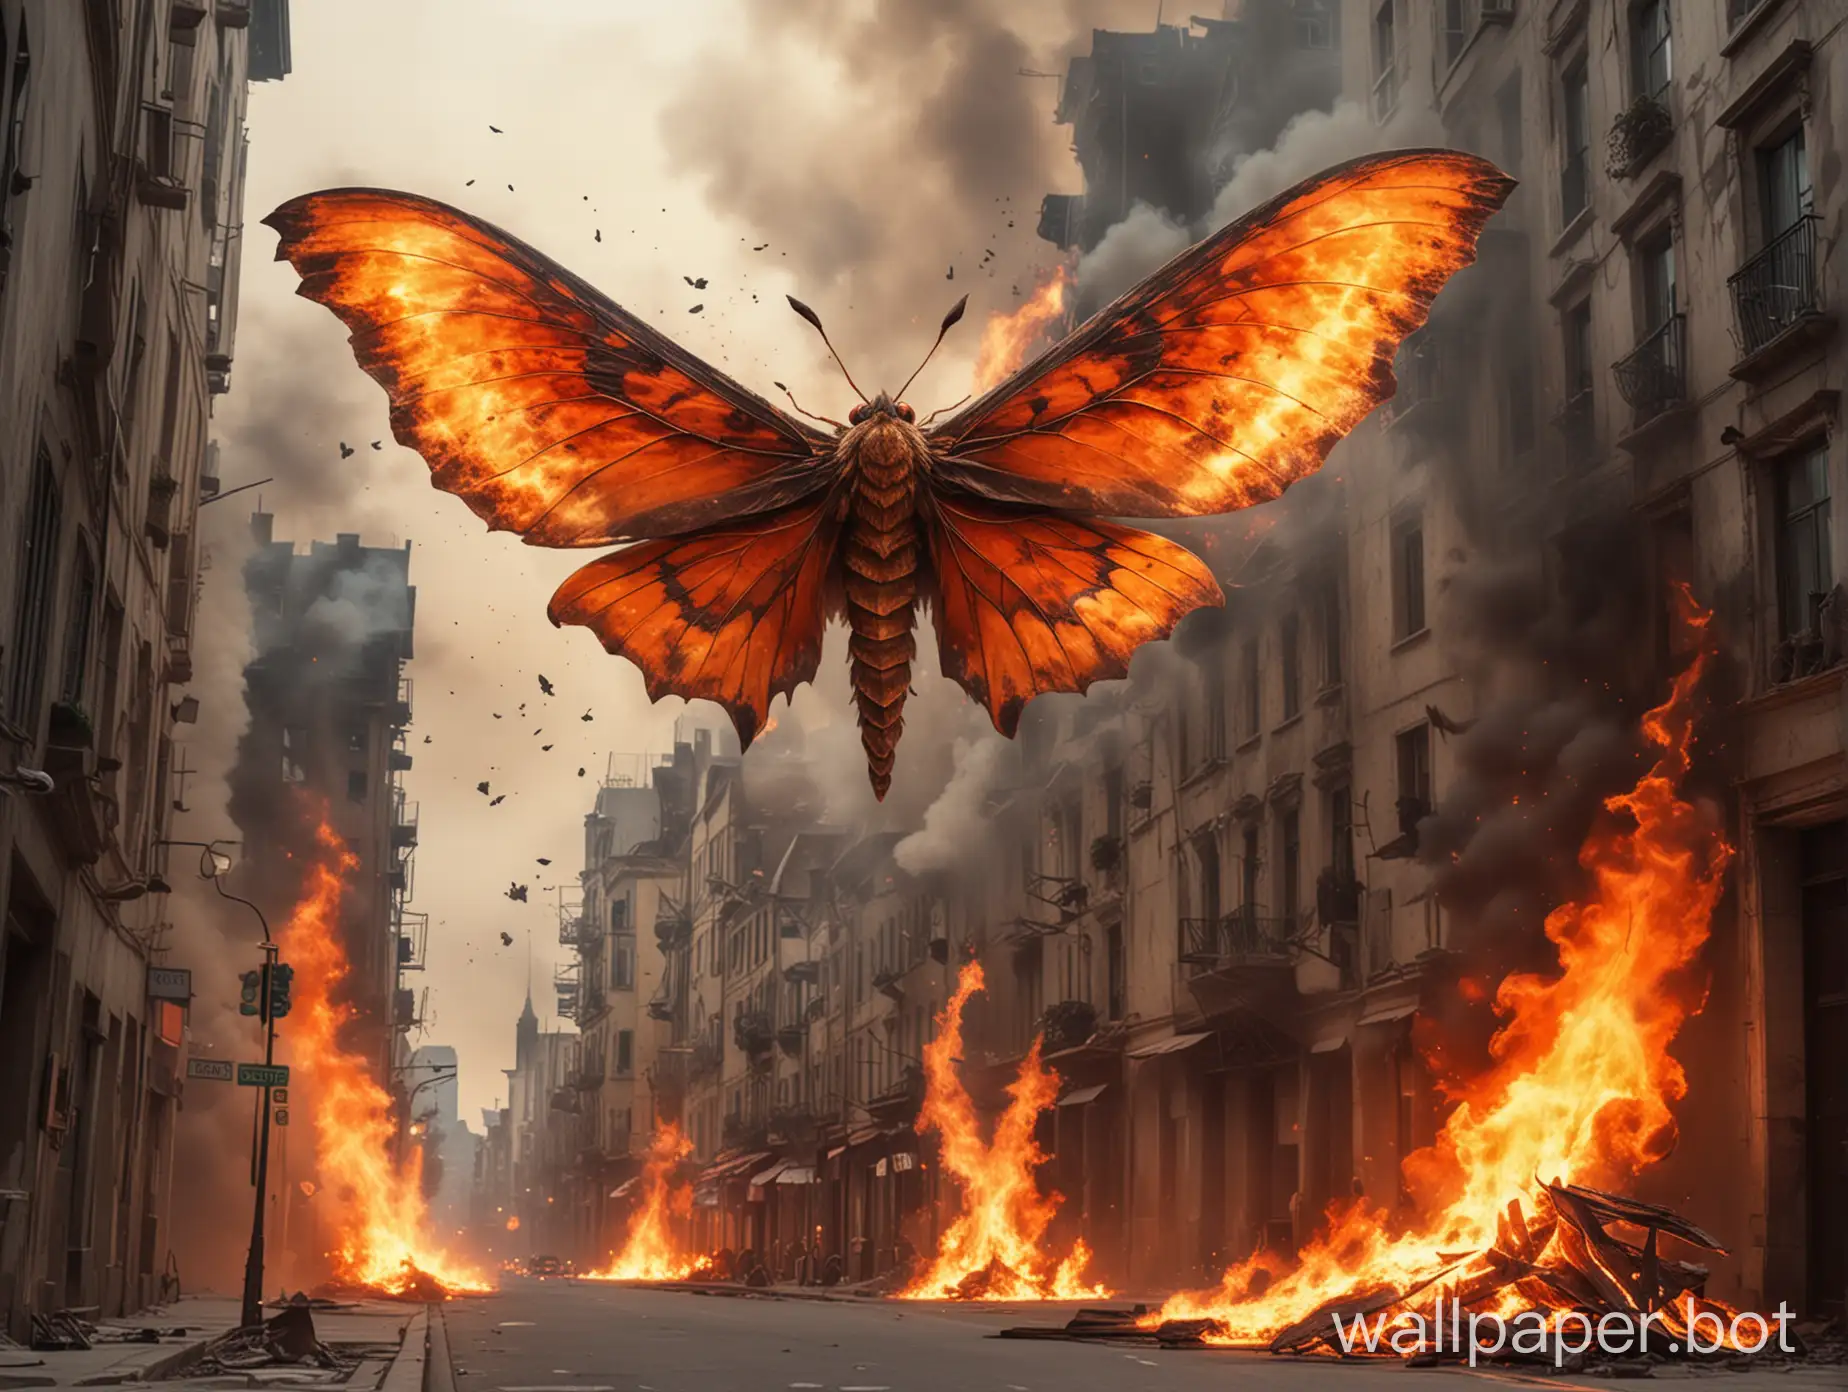 Fiery-Giant-Moth-Soars-Over-Burning-Cityscape